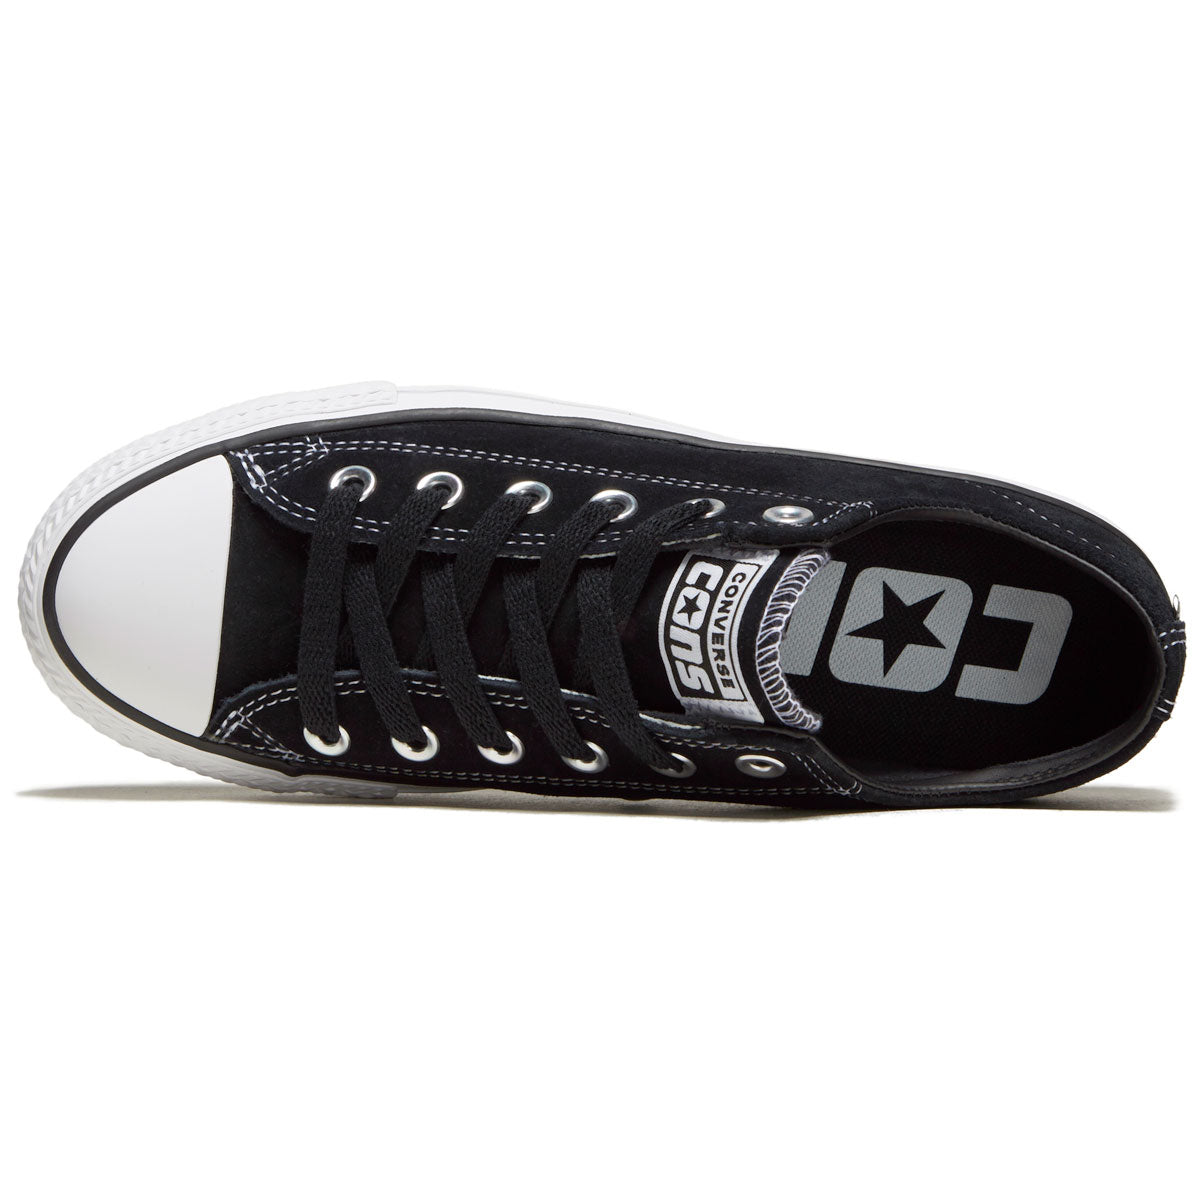 Converse Chuck Taylor All Star Pro Suede Ox Shoes - Black/Black/White, – CCS